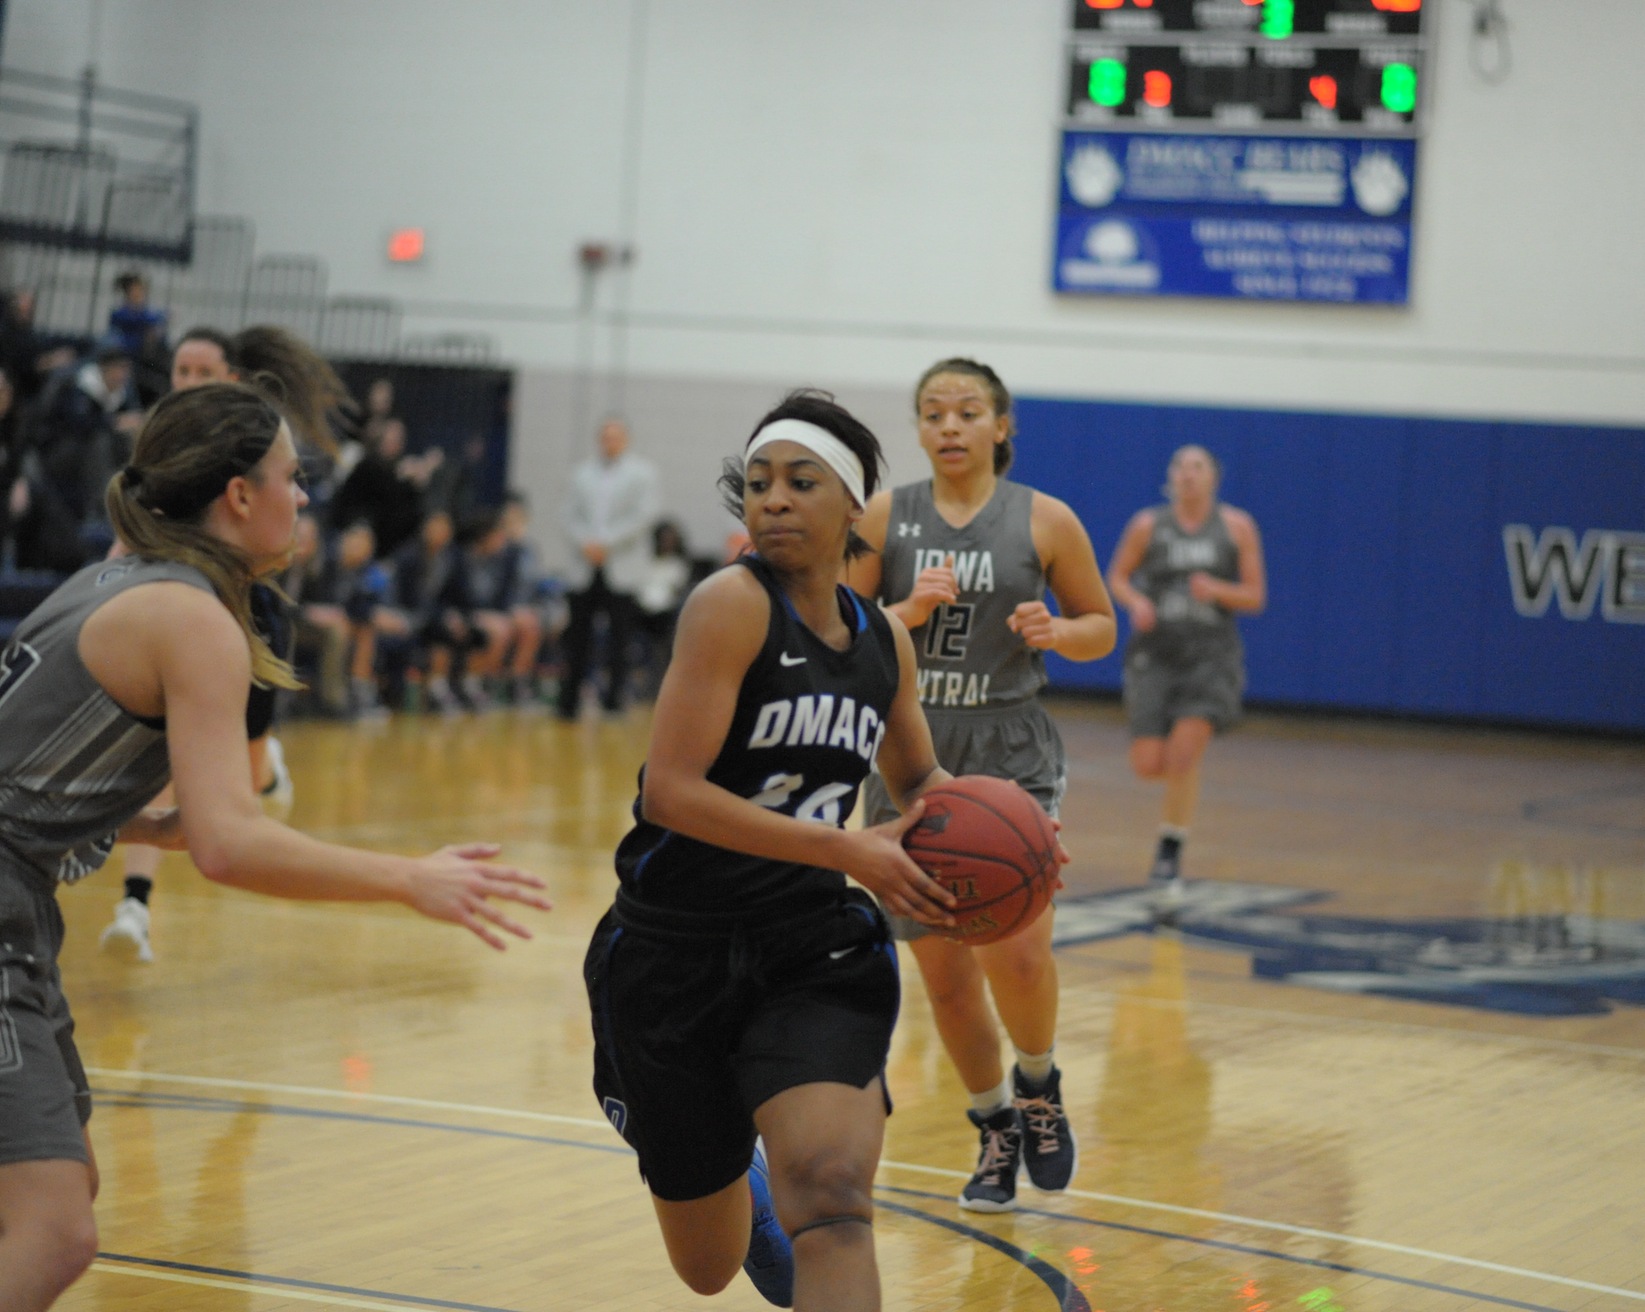 DMACC Women's Basketball Team Downed by ICCC, 59-54